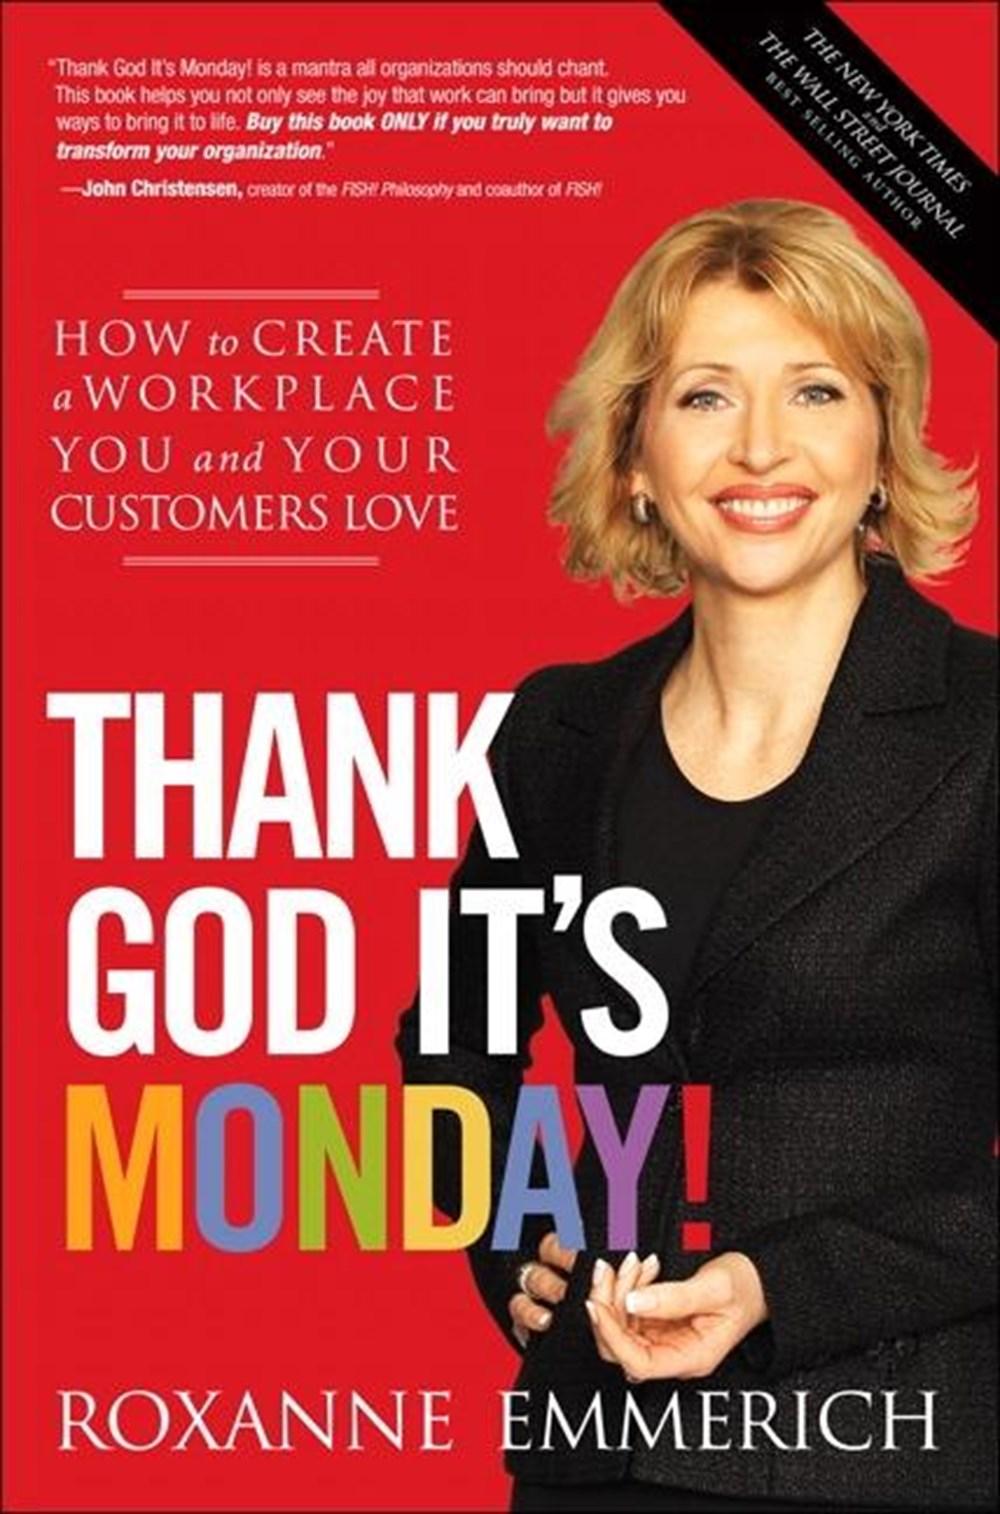 Thank God It's Monday! How to Create a Workplace You and Your Customers Love